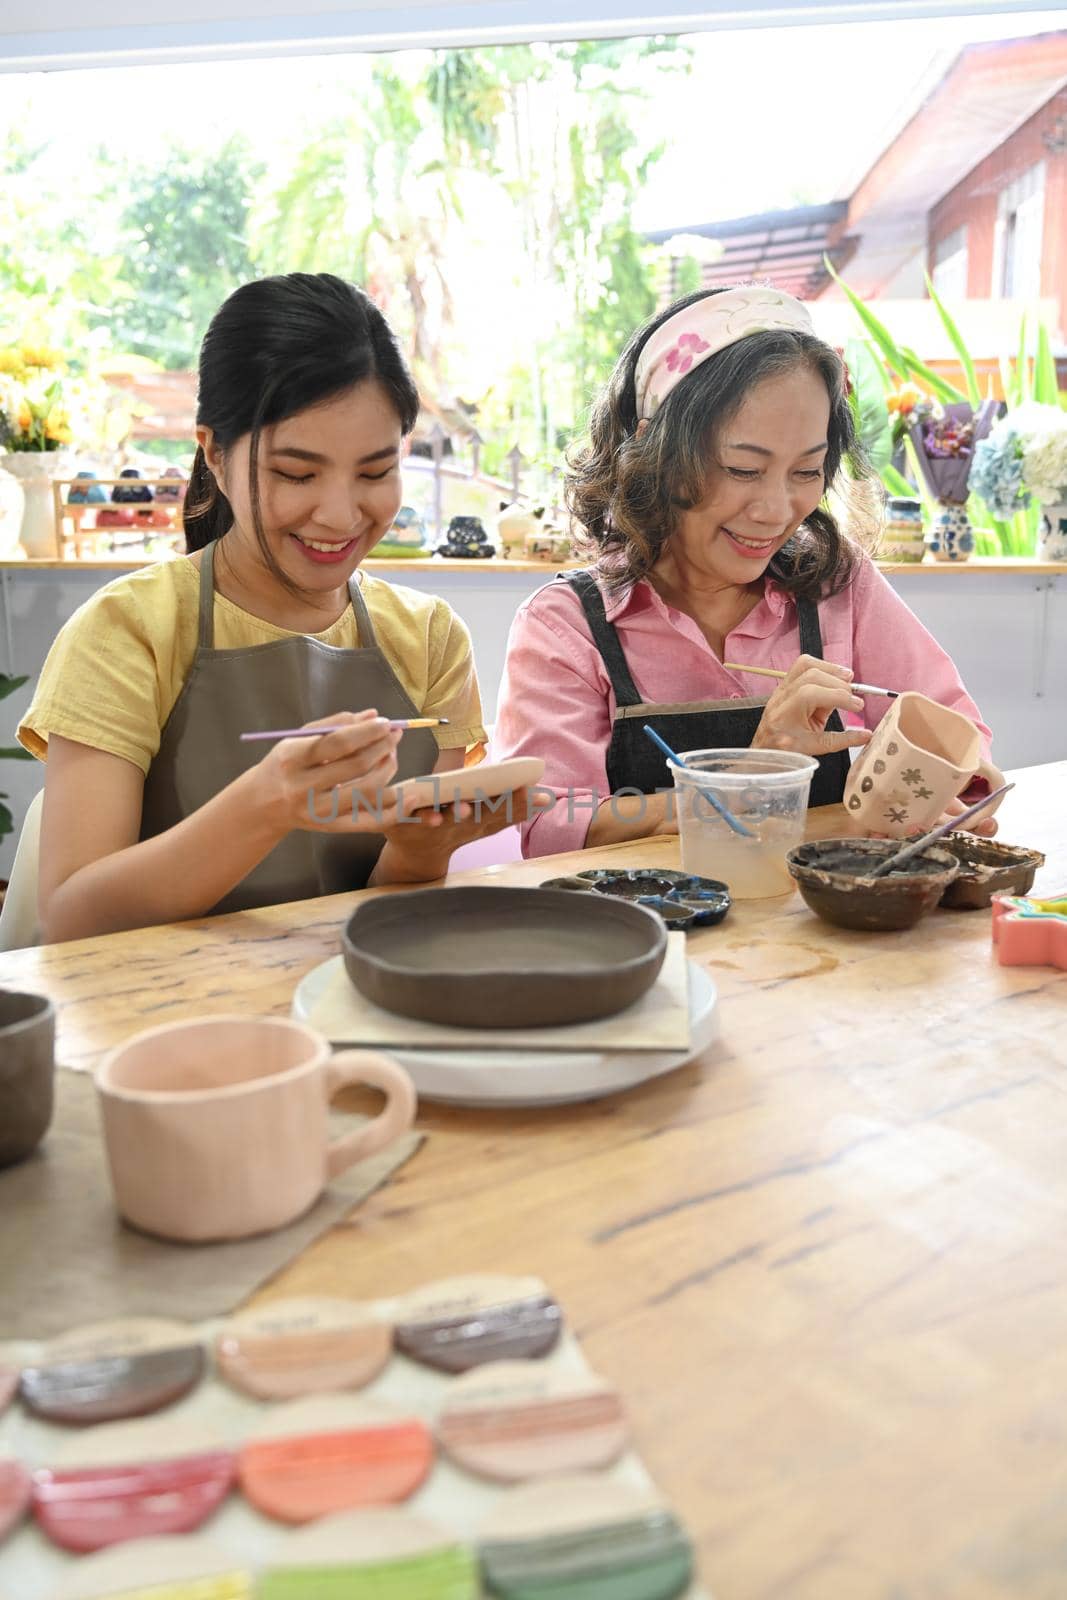 Middle aged woman and young woman making ceramics in craft studio workshop. Activity, handicraft, hobbies concept by prathanchorruangsak